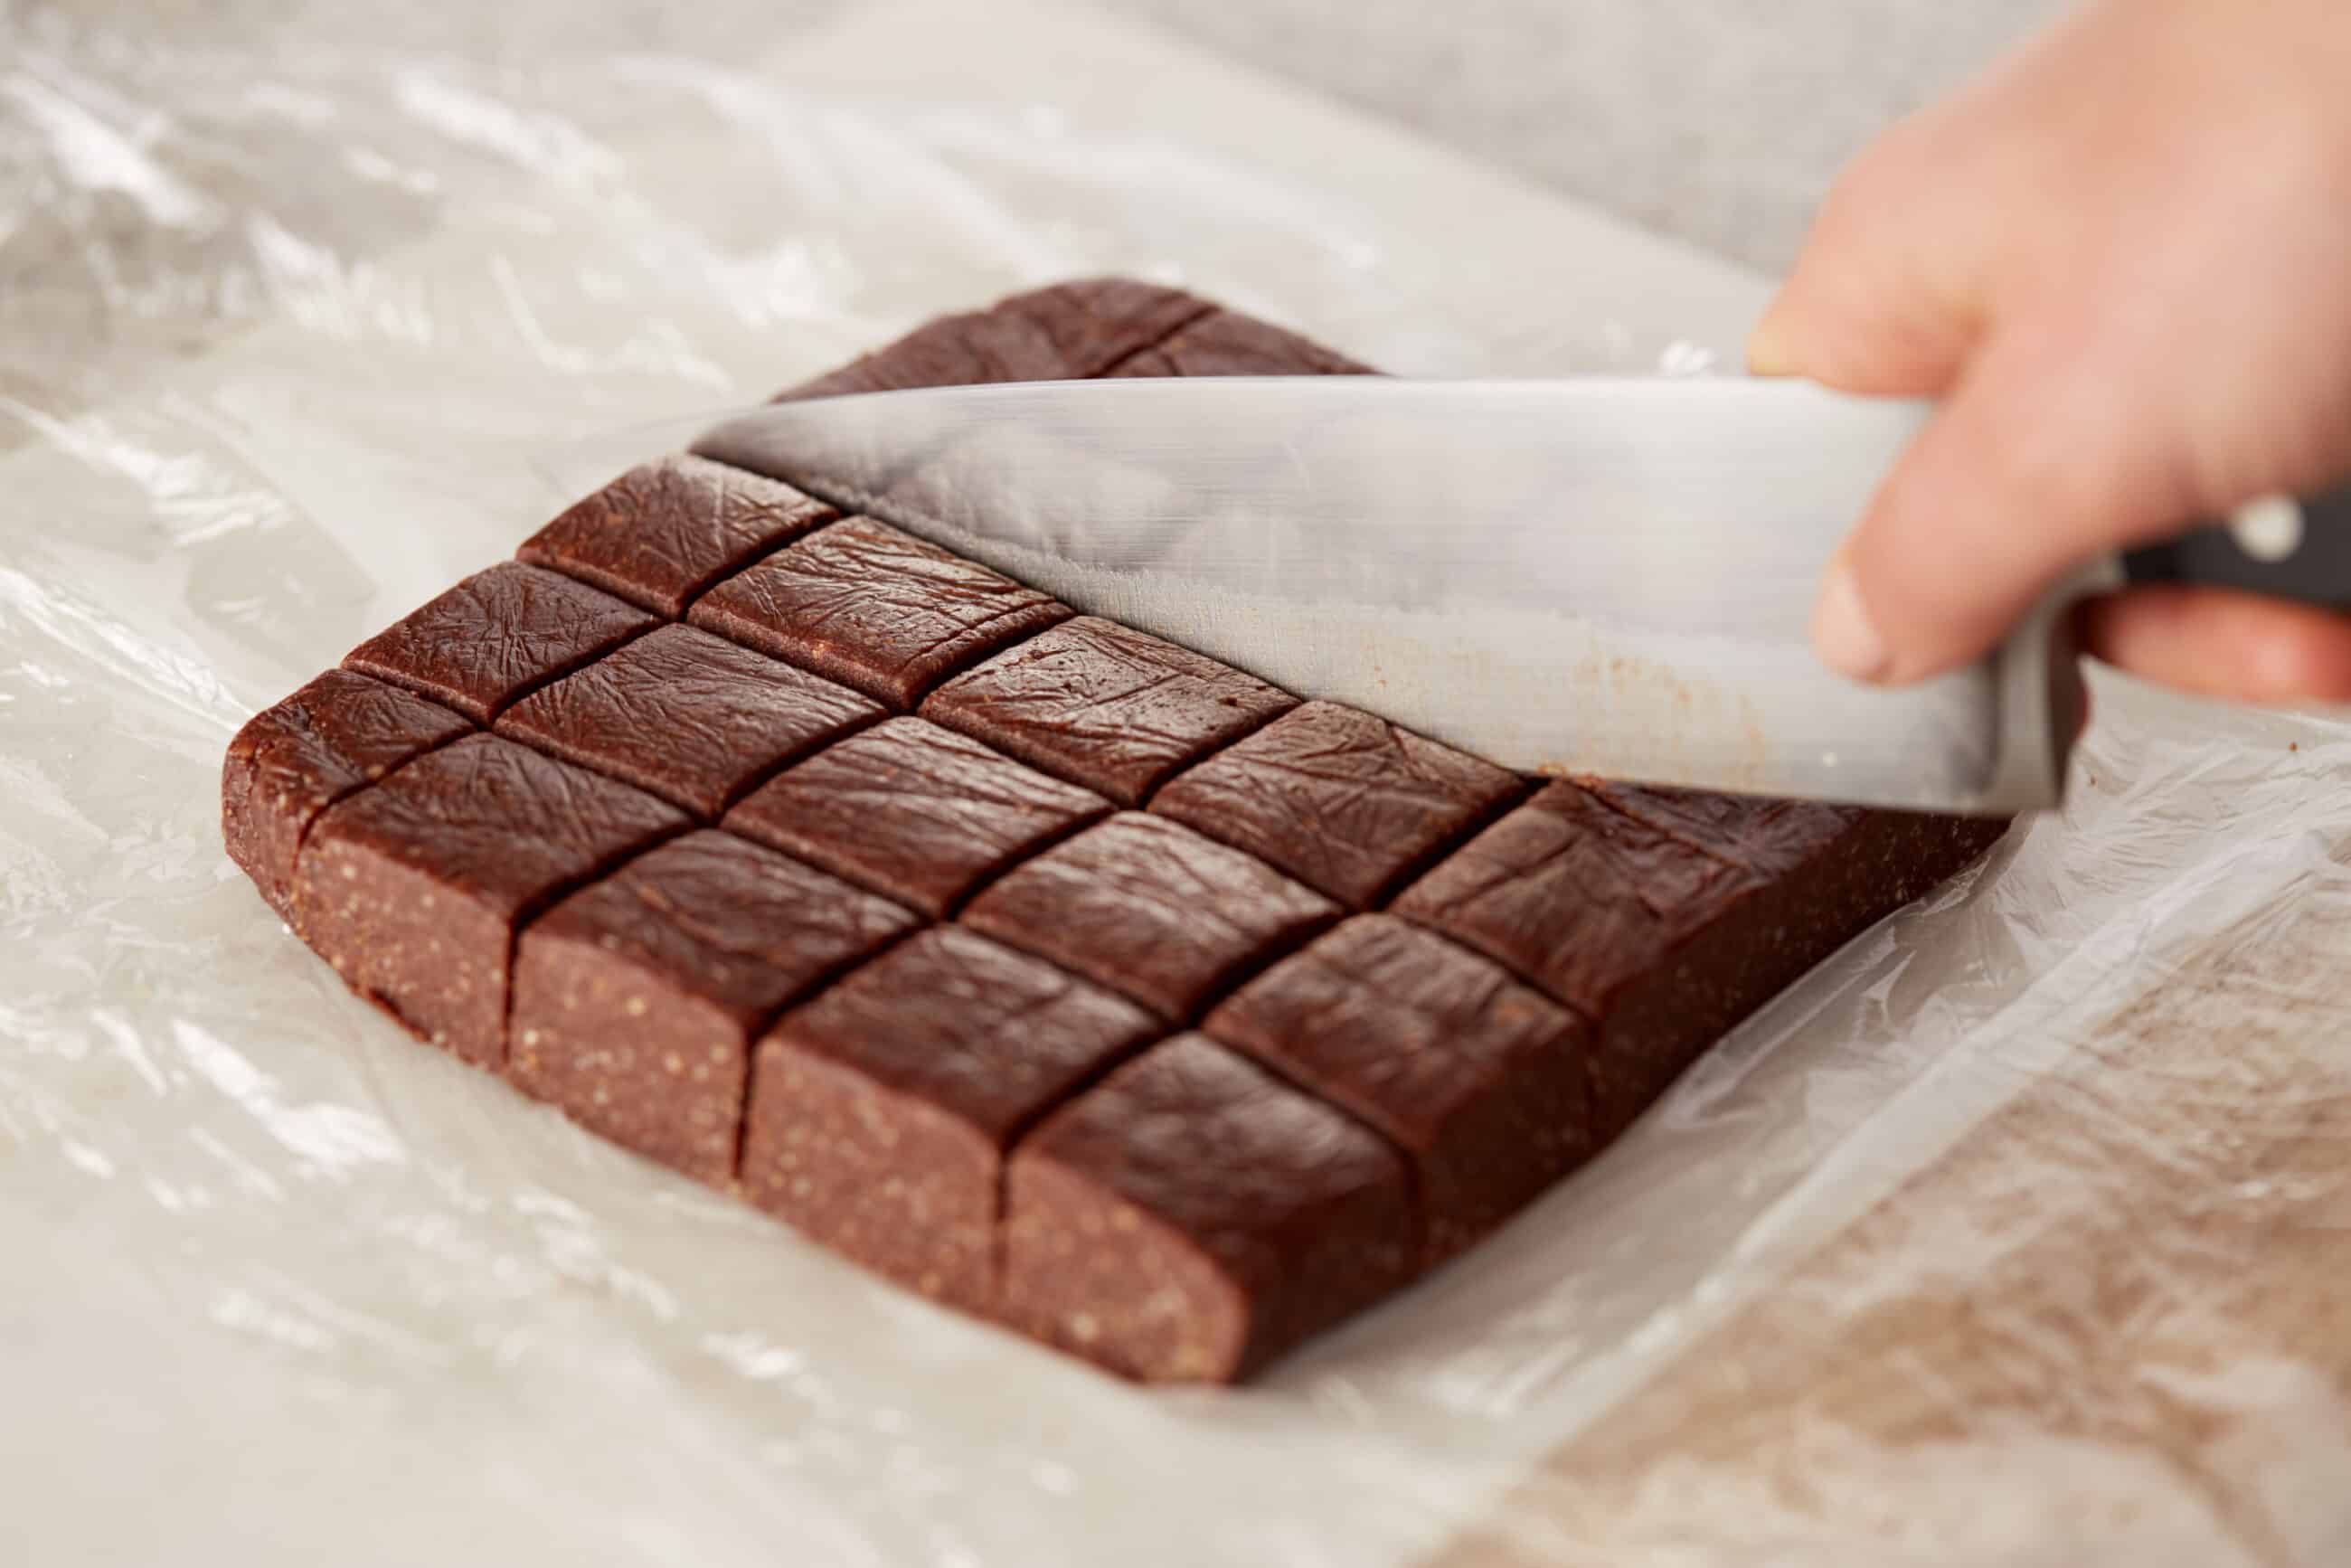 Dividing the brownies up with a knife